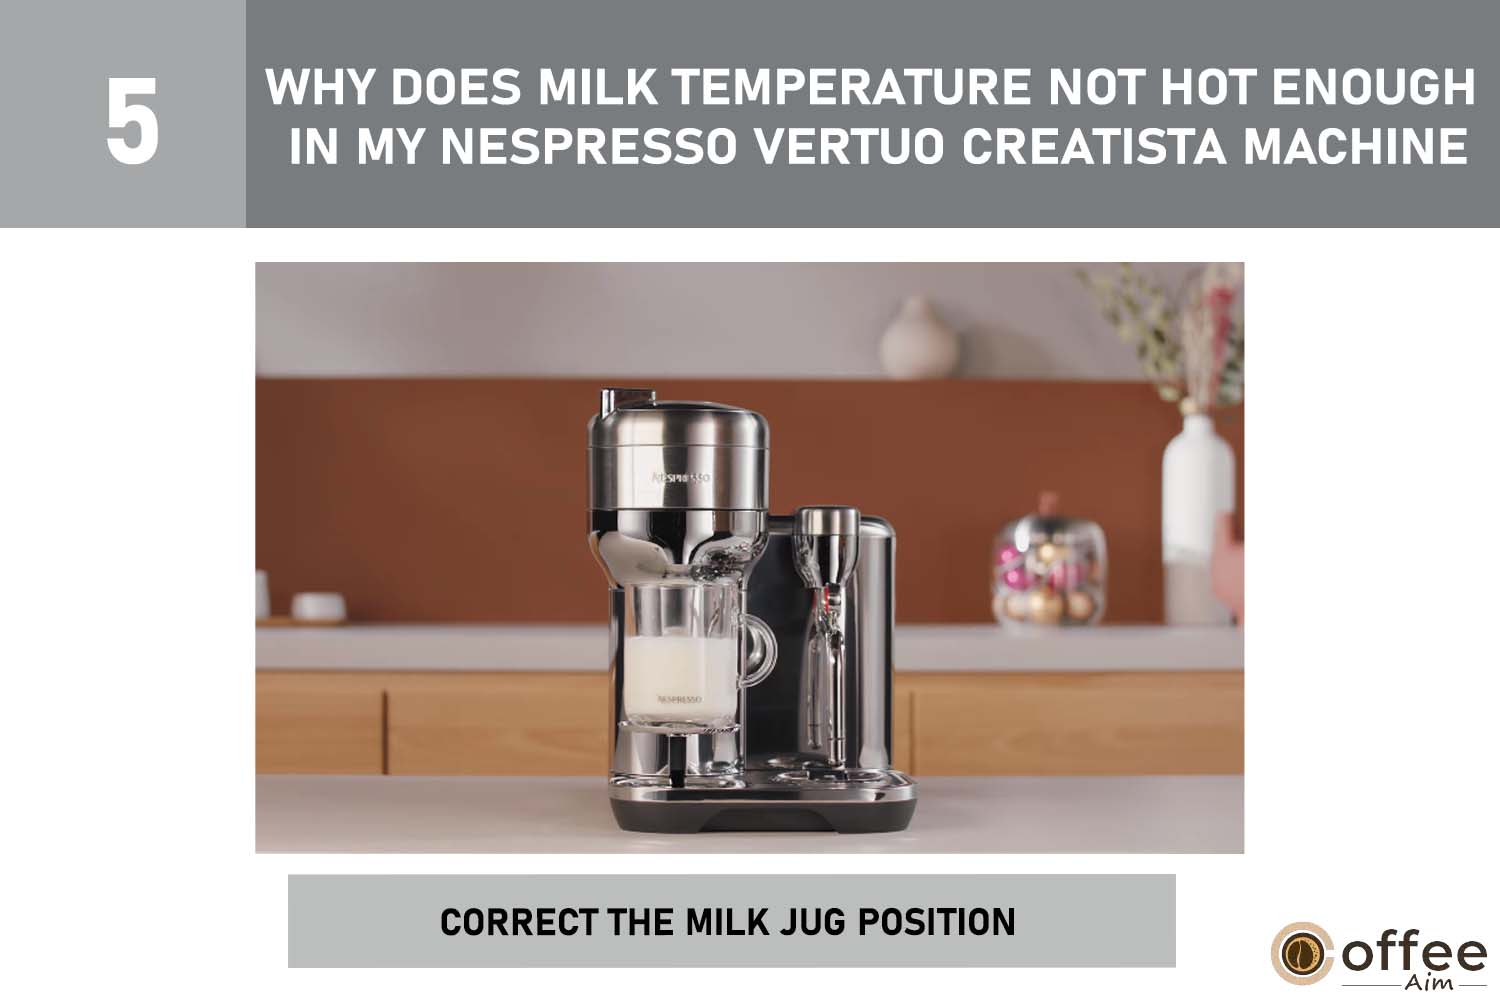 Adjust milk jug placement in your Nespresso Vertuo Creatista to ensure proper temperature. Follow steps in the article for guidance.